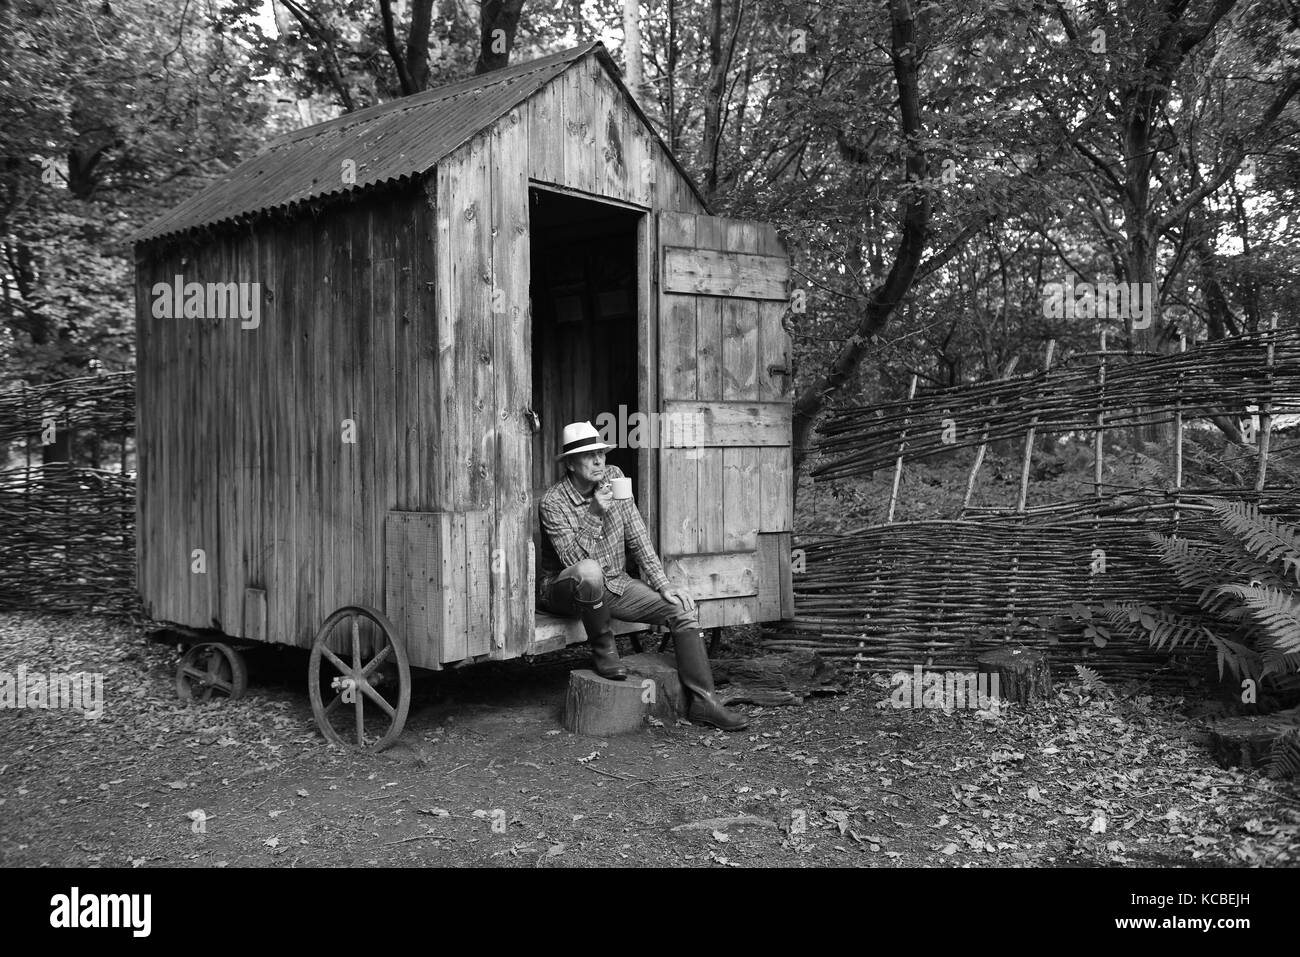 Man relaxing at woodland garden shed on wheels Britain Uk secluded seclusion isolation hideaway rural retreat Stock Photo